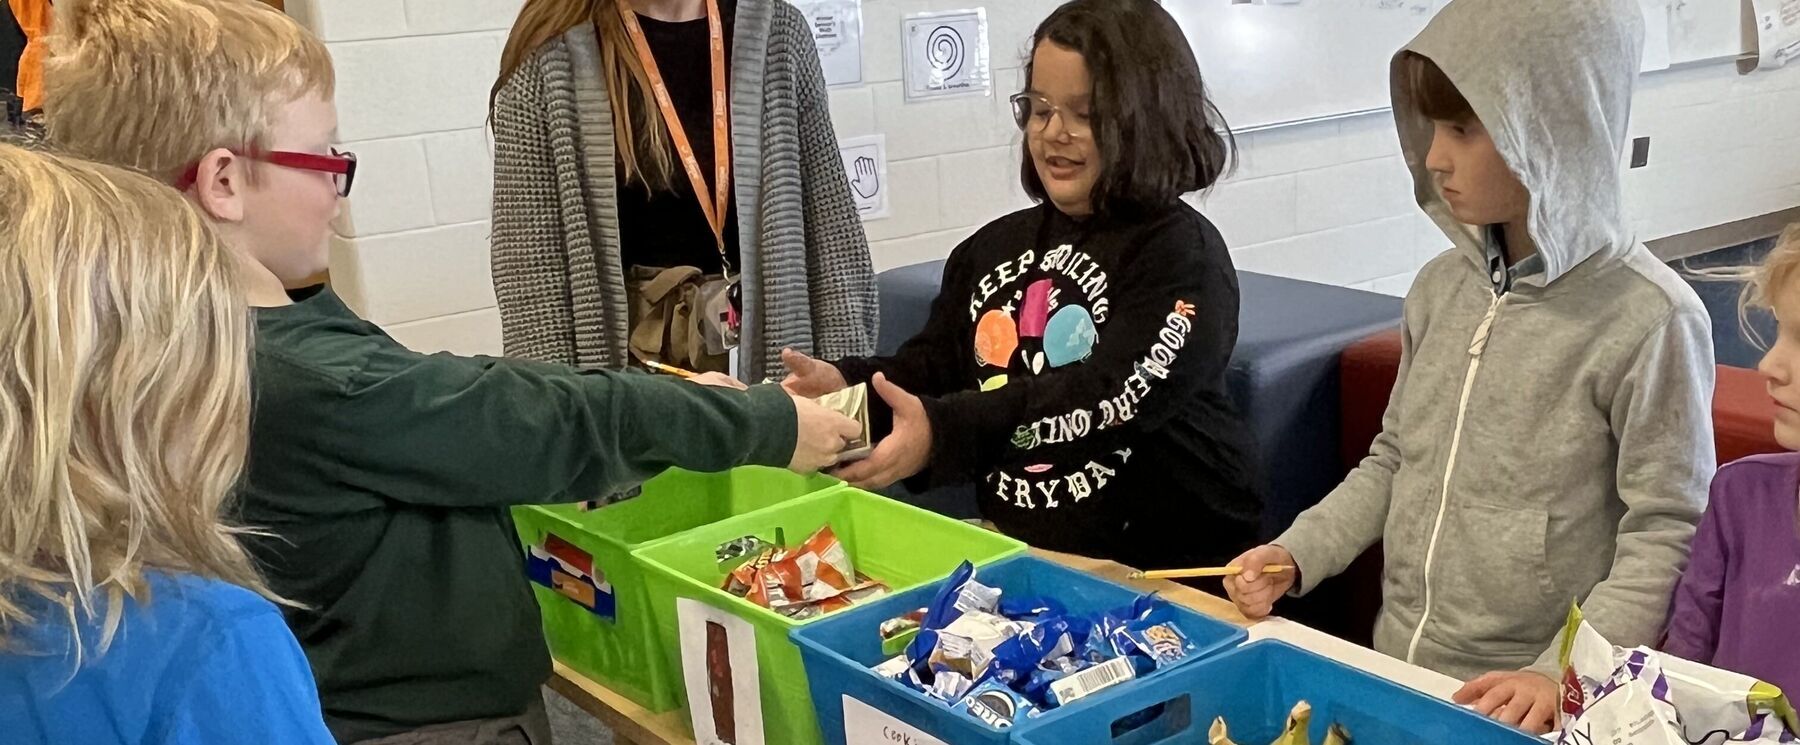 A first grade student pays for a snack at a snack table.